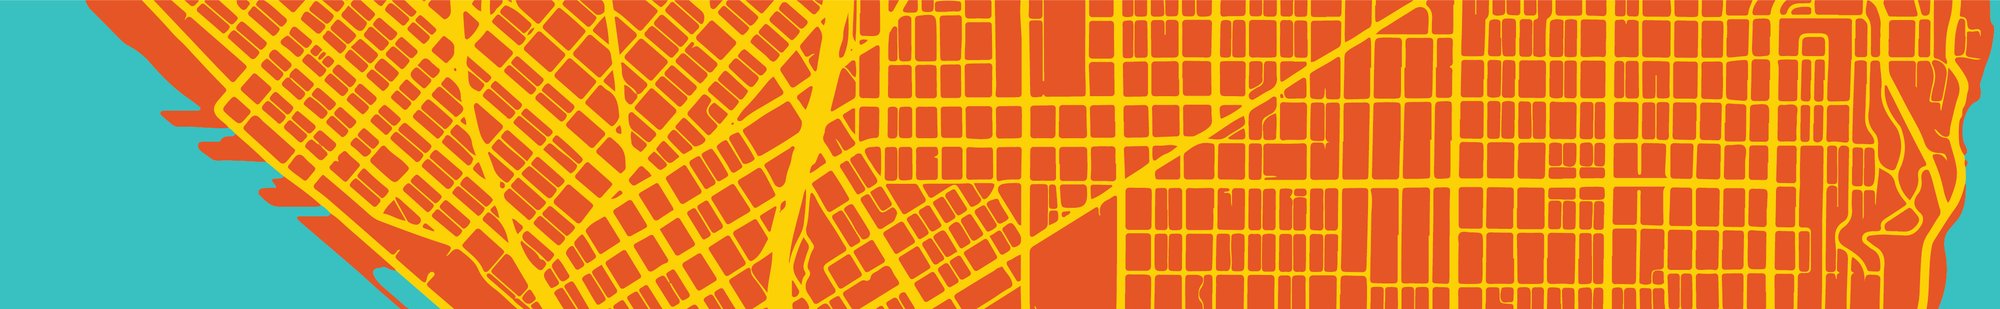 Orange, blue, and yellow city map outline 